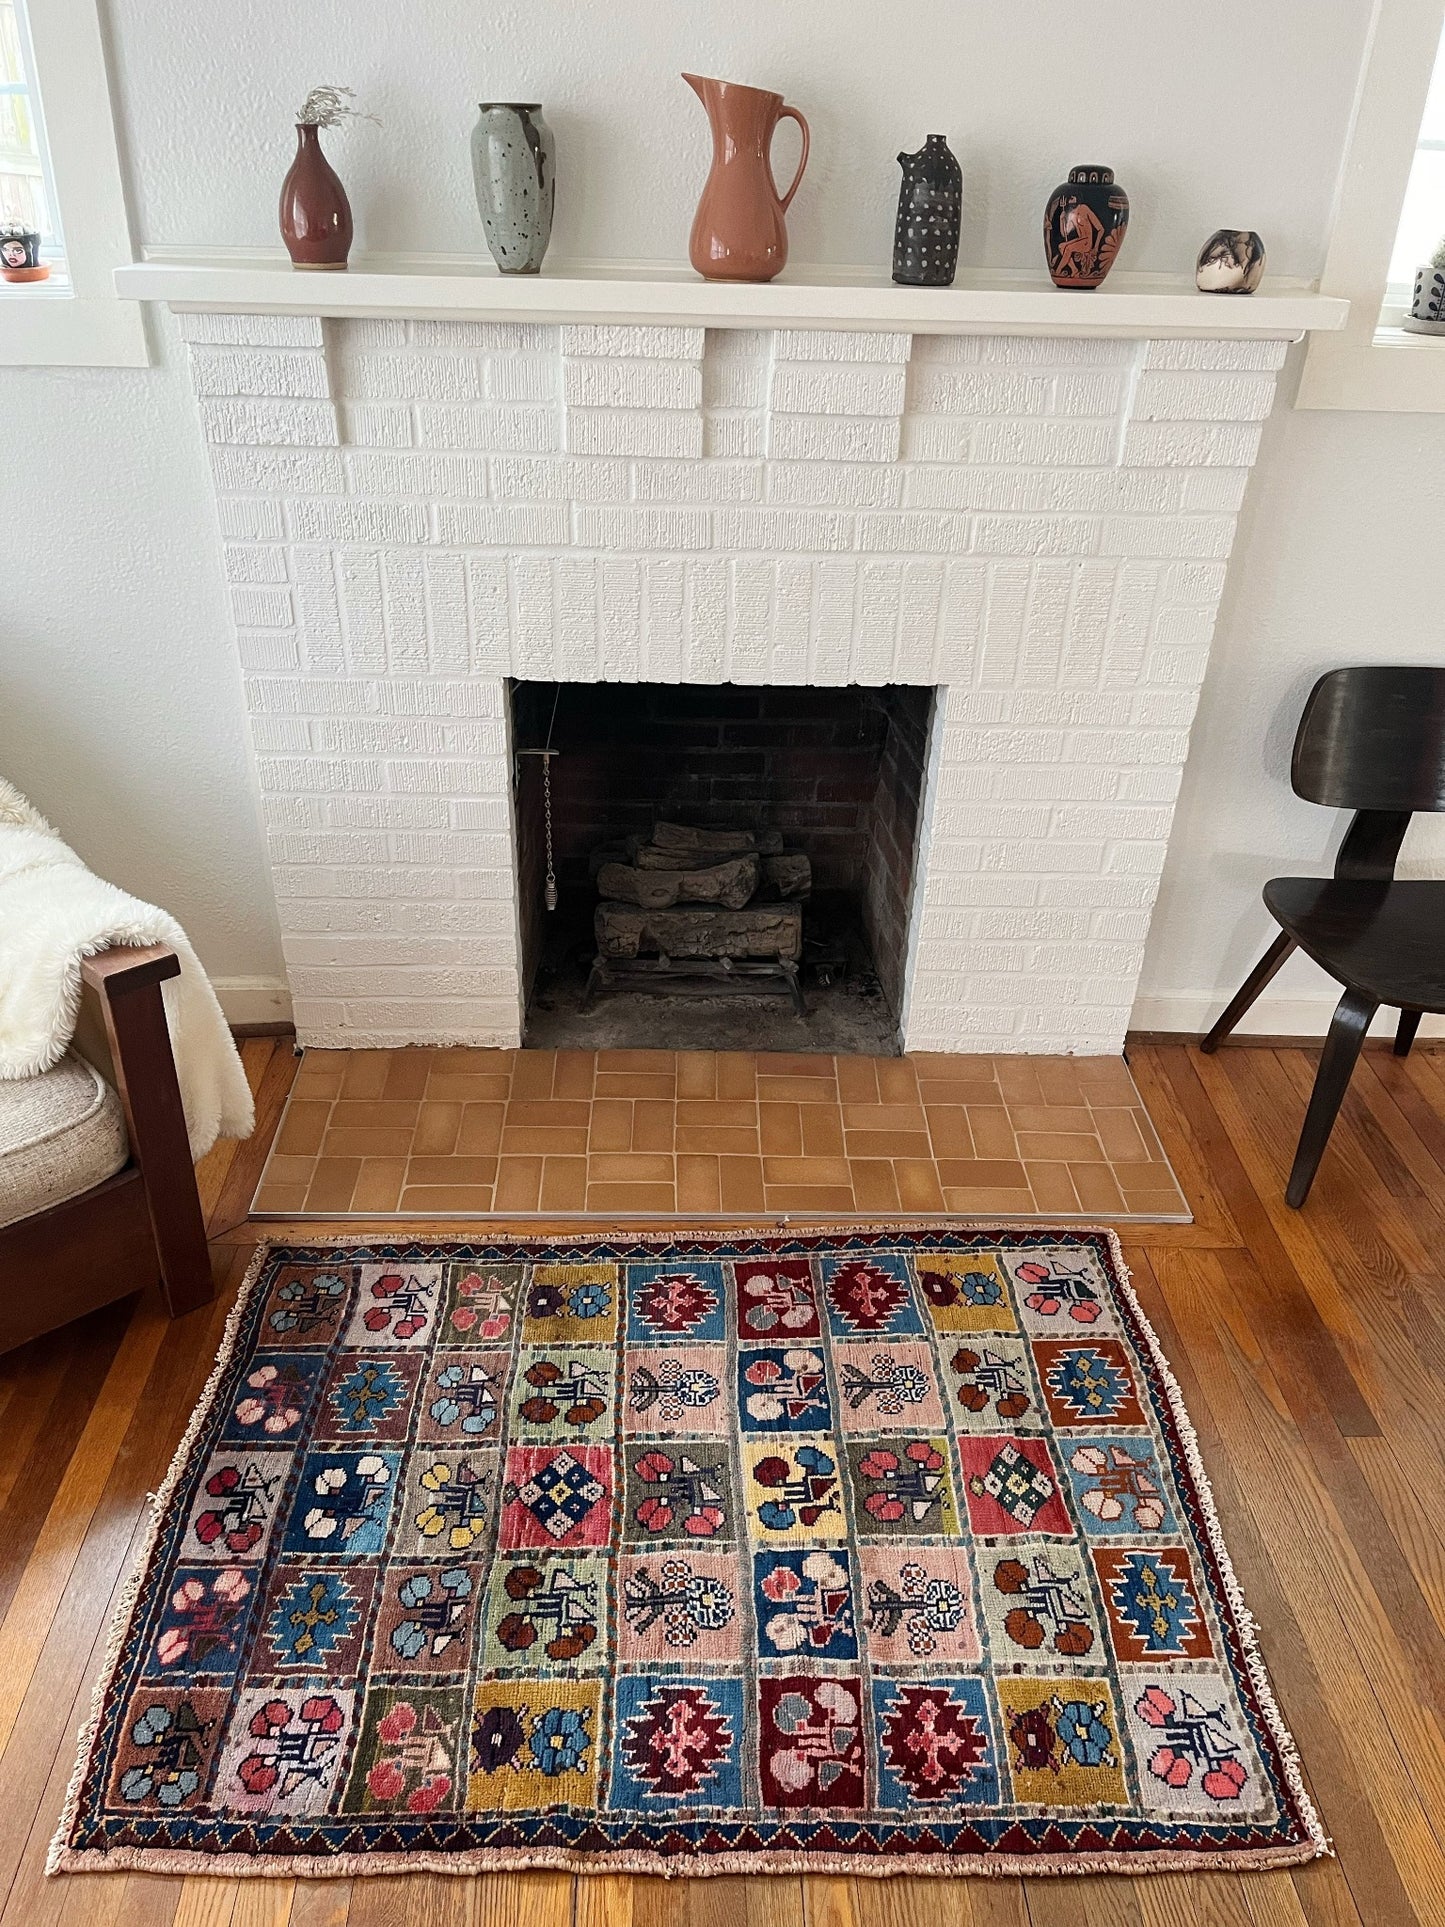 Style Danli Persian Rug by the Fireplace